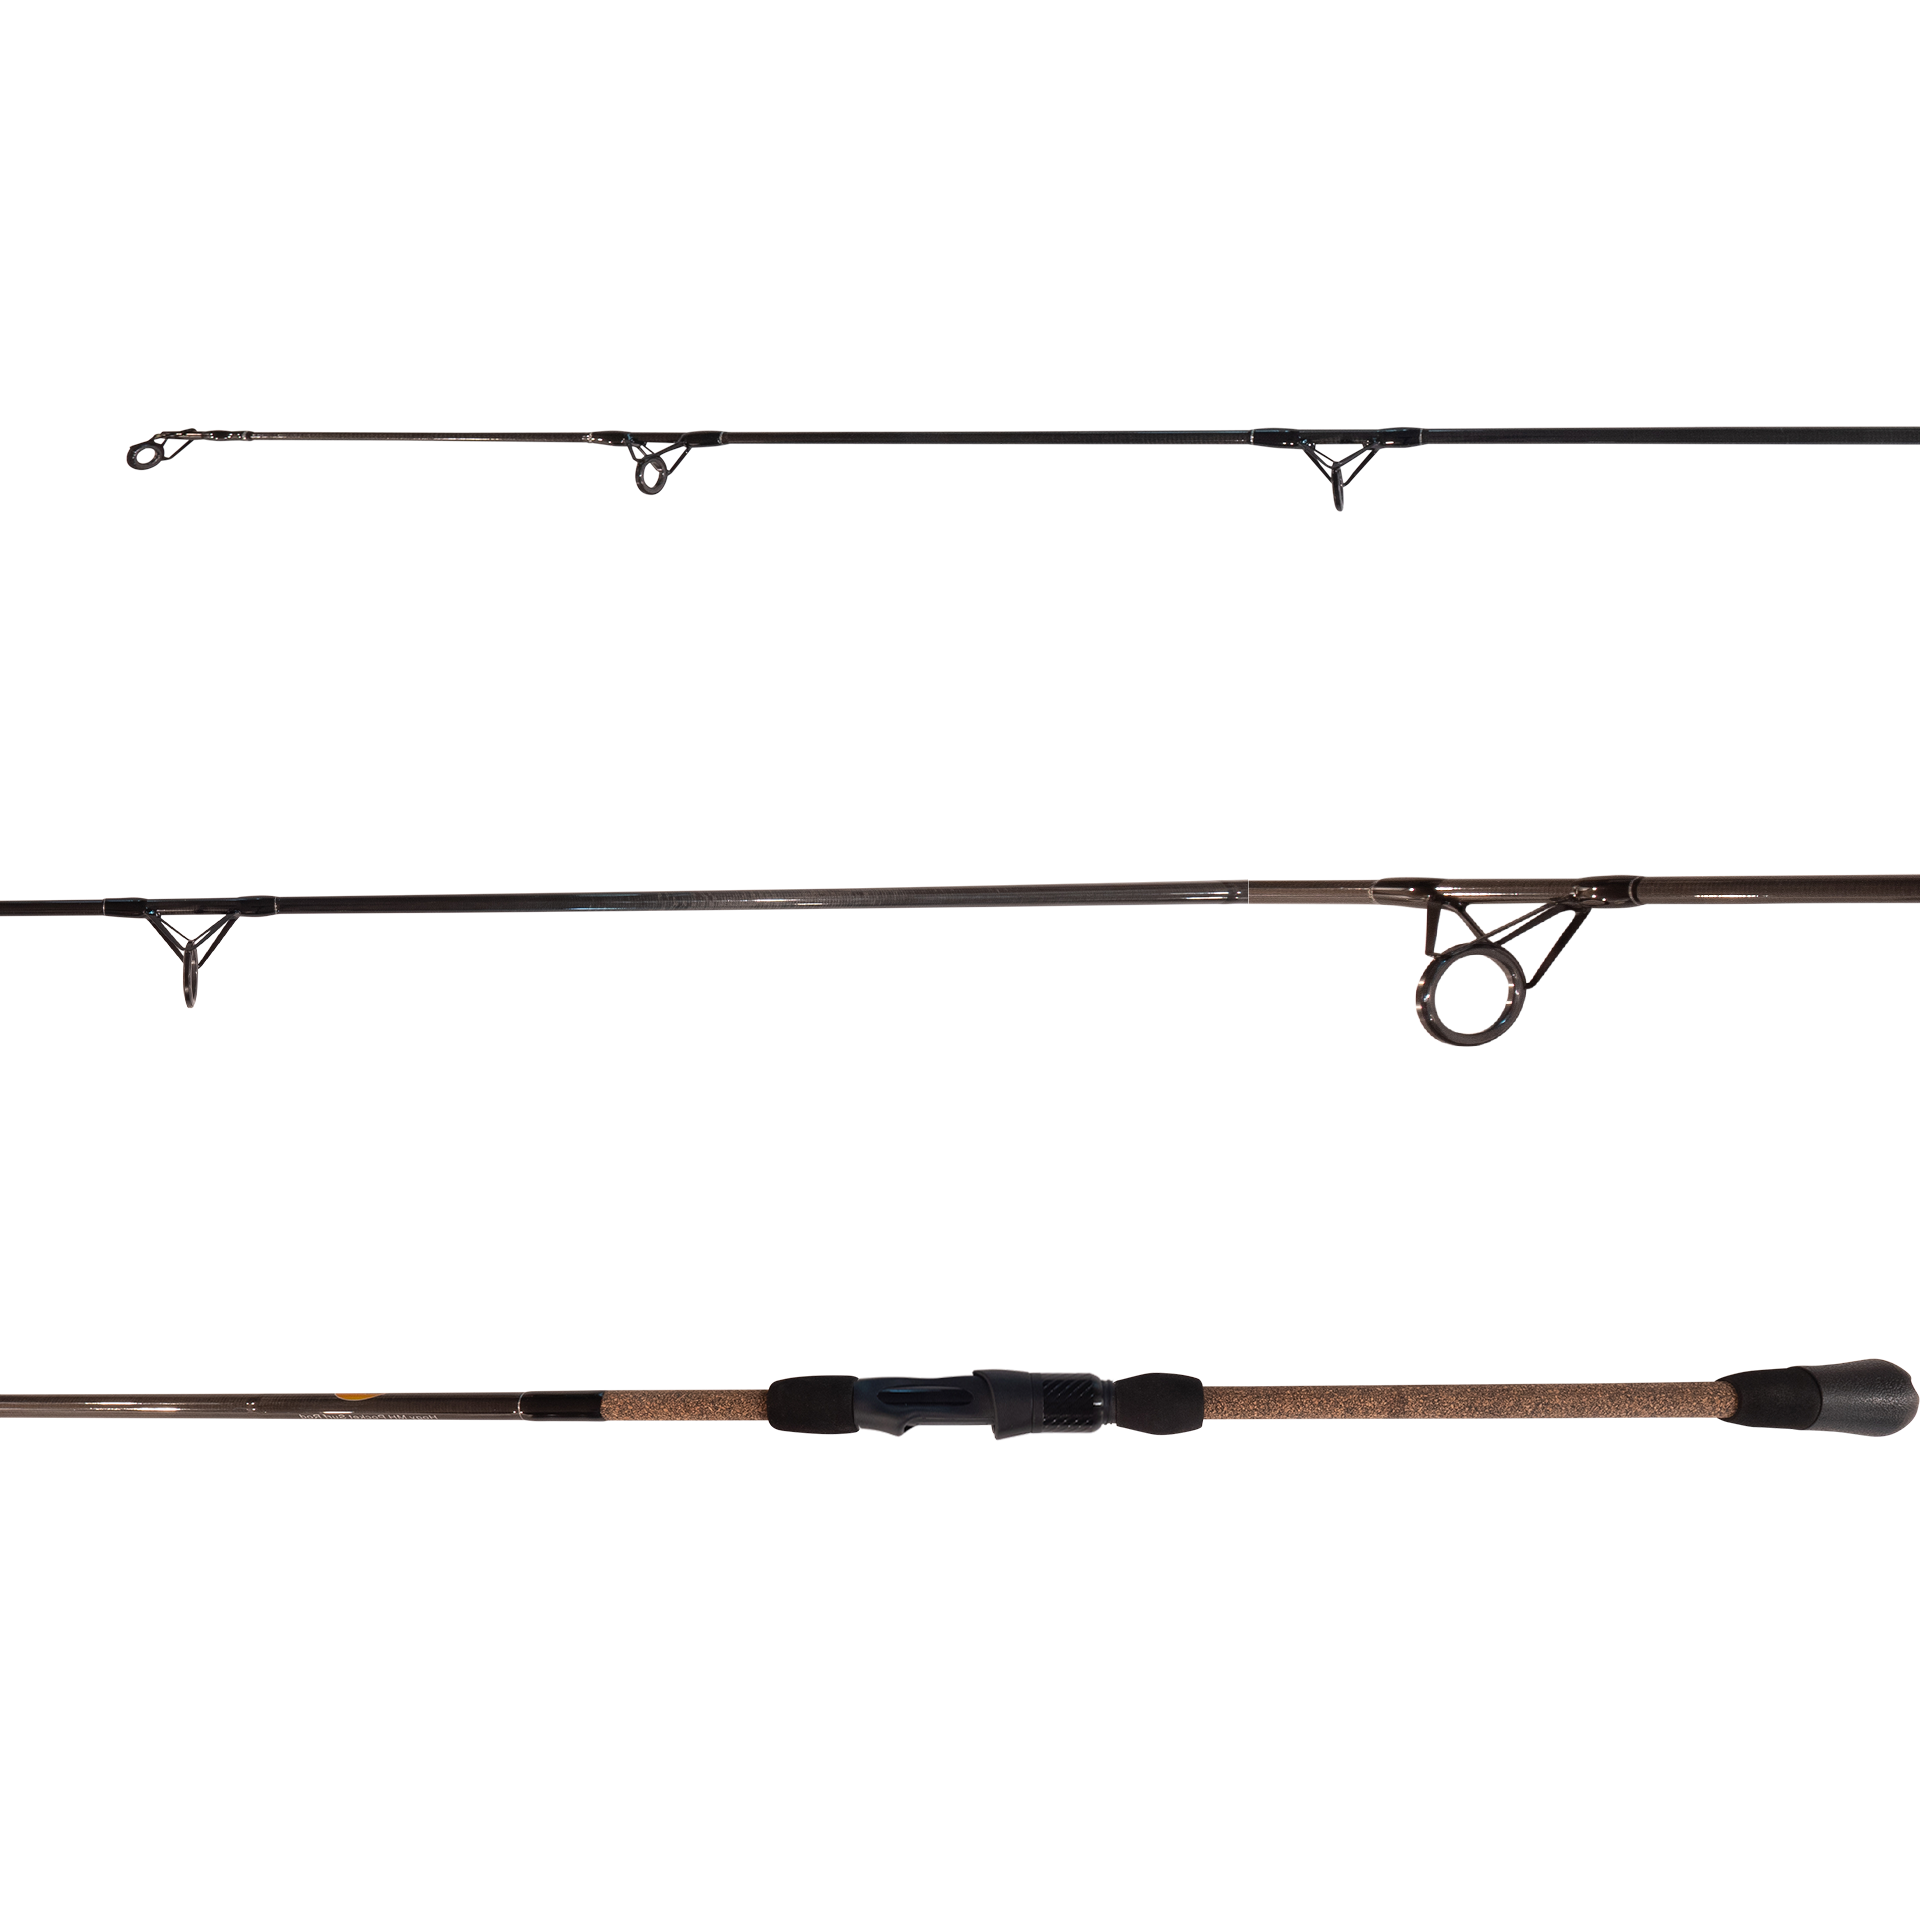 FTO Pre-Order Special: Pocket Surf Rod: Mod-Fast Action 7' ML (3/8oz - 1oz) (Ship Date By 5/15)